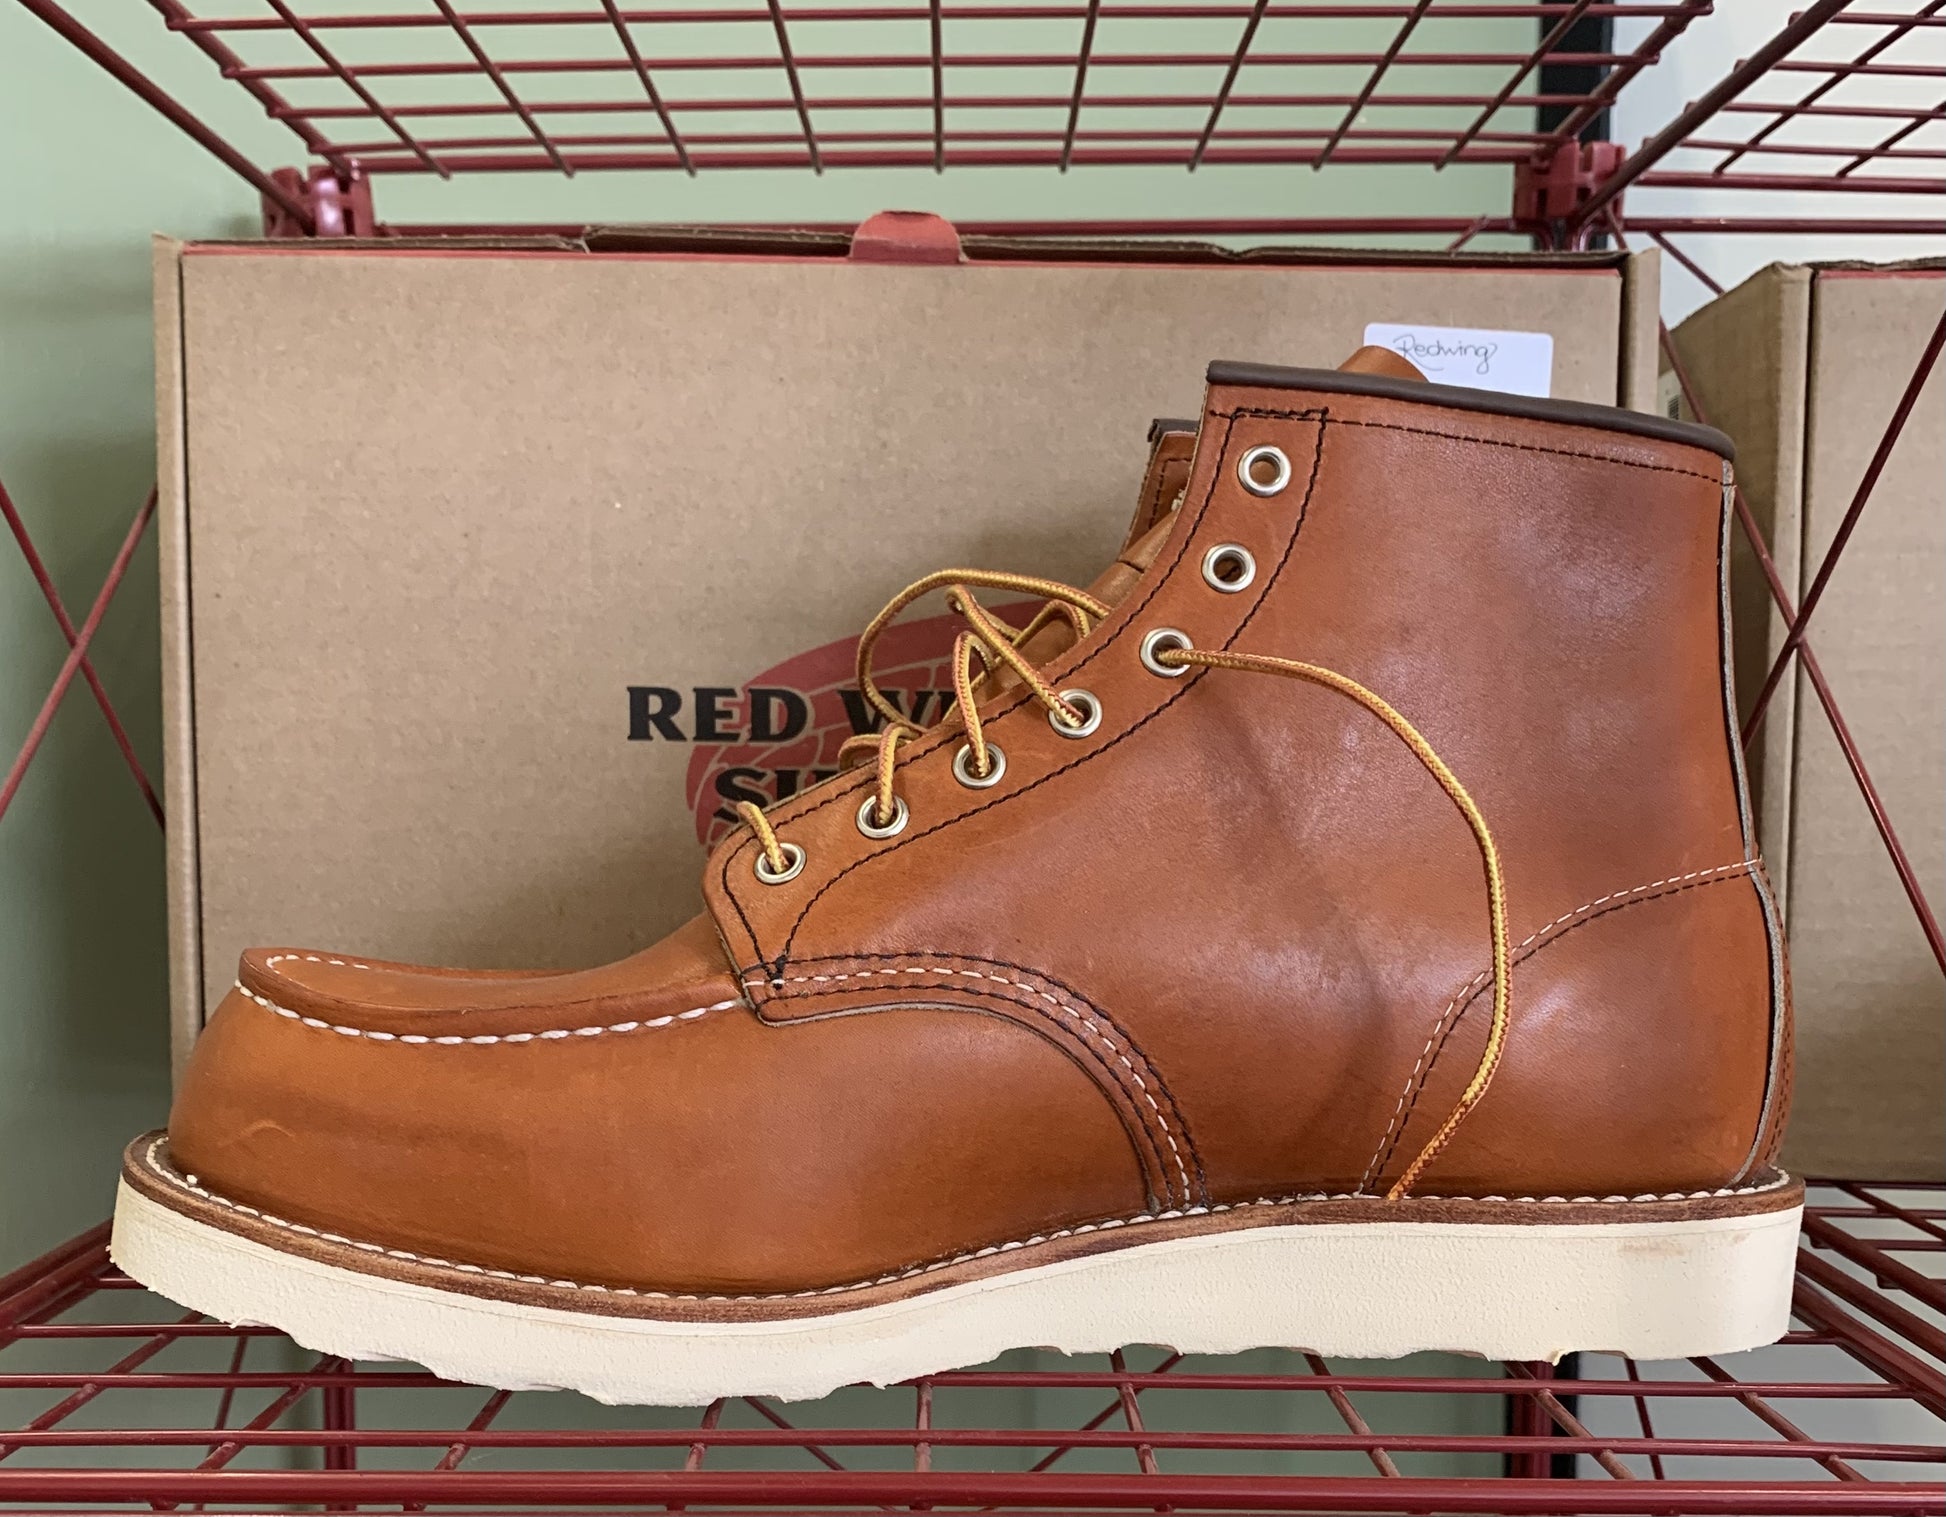 The Classic “Moc Toe” from Redwing, the perfection combination of function and form.